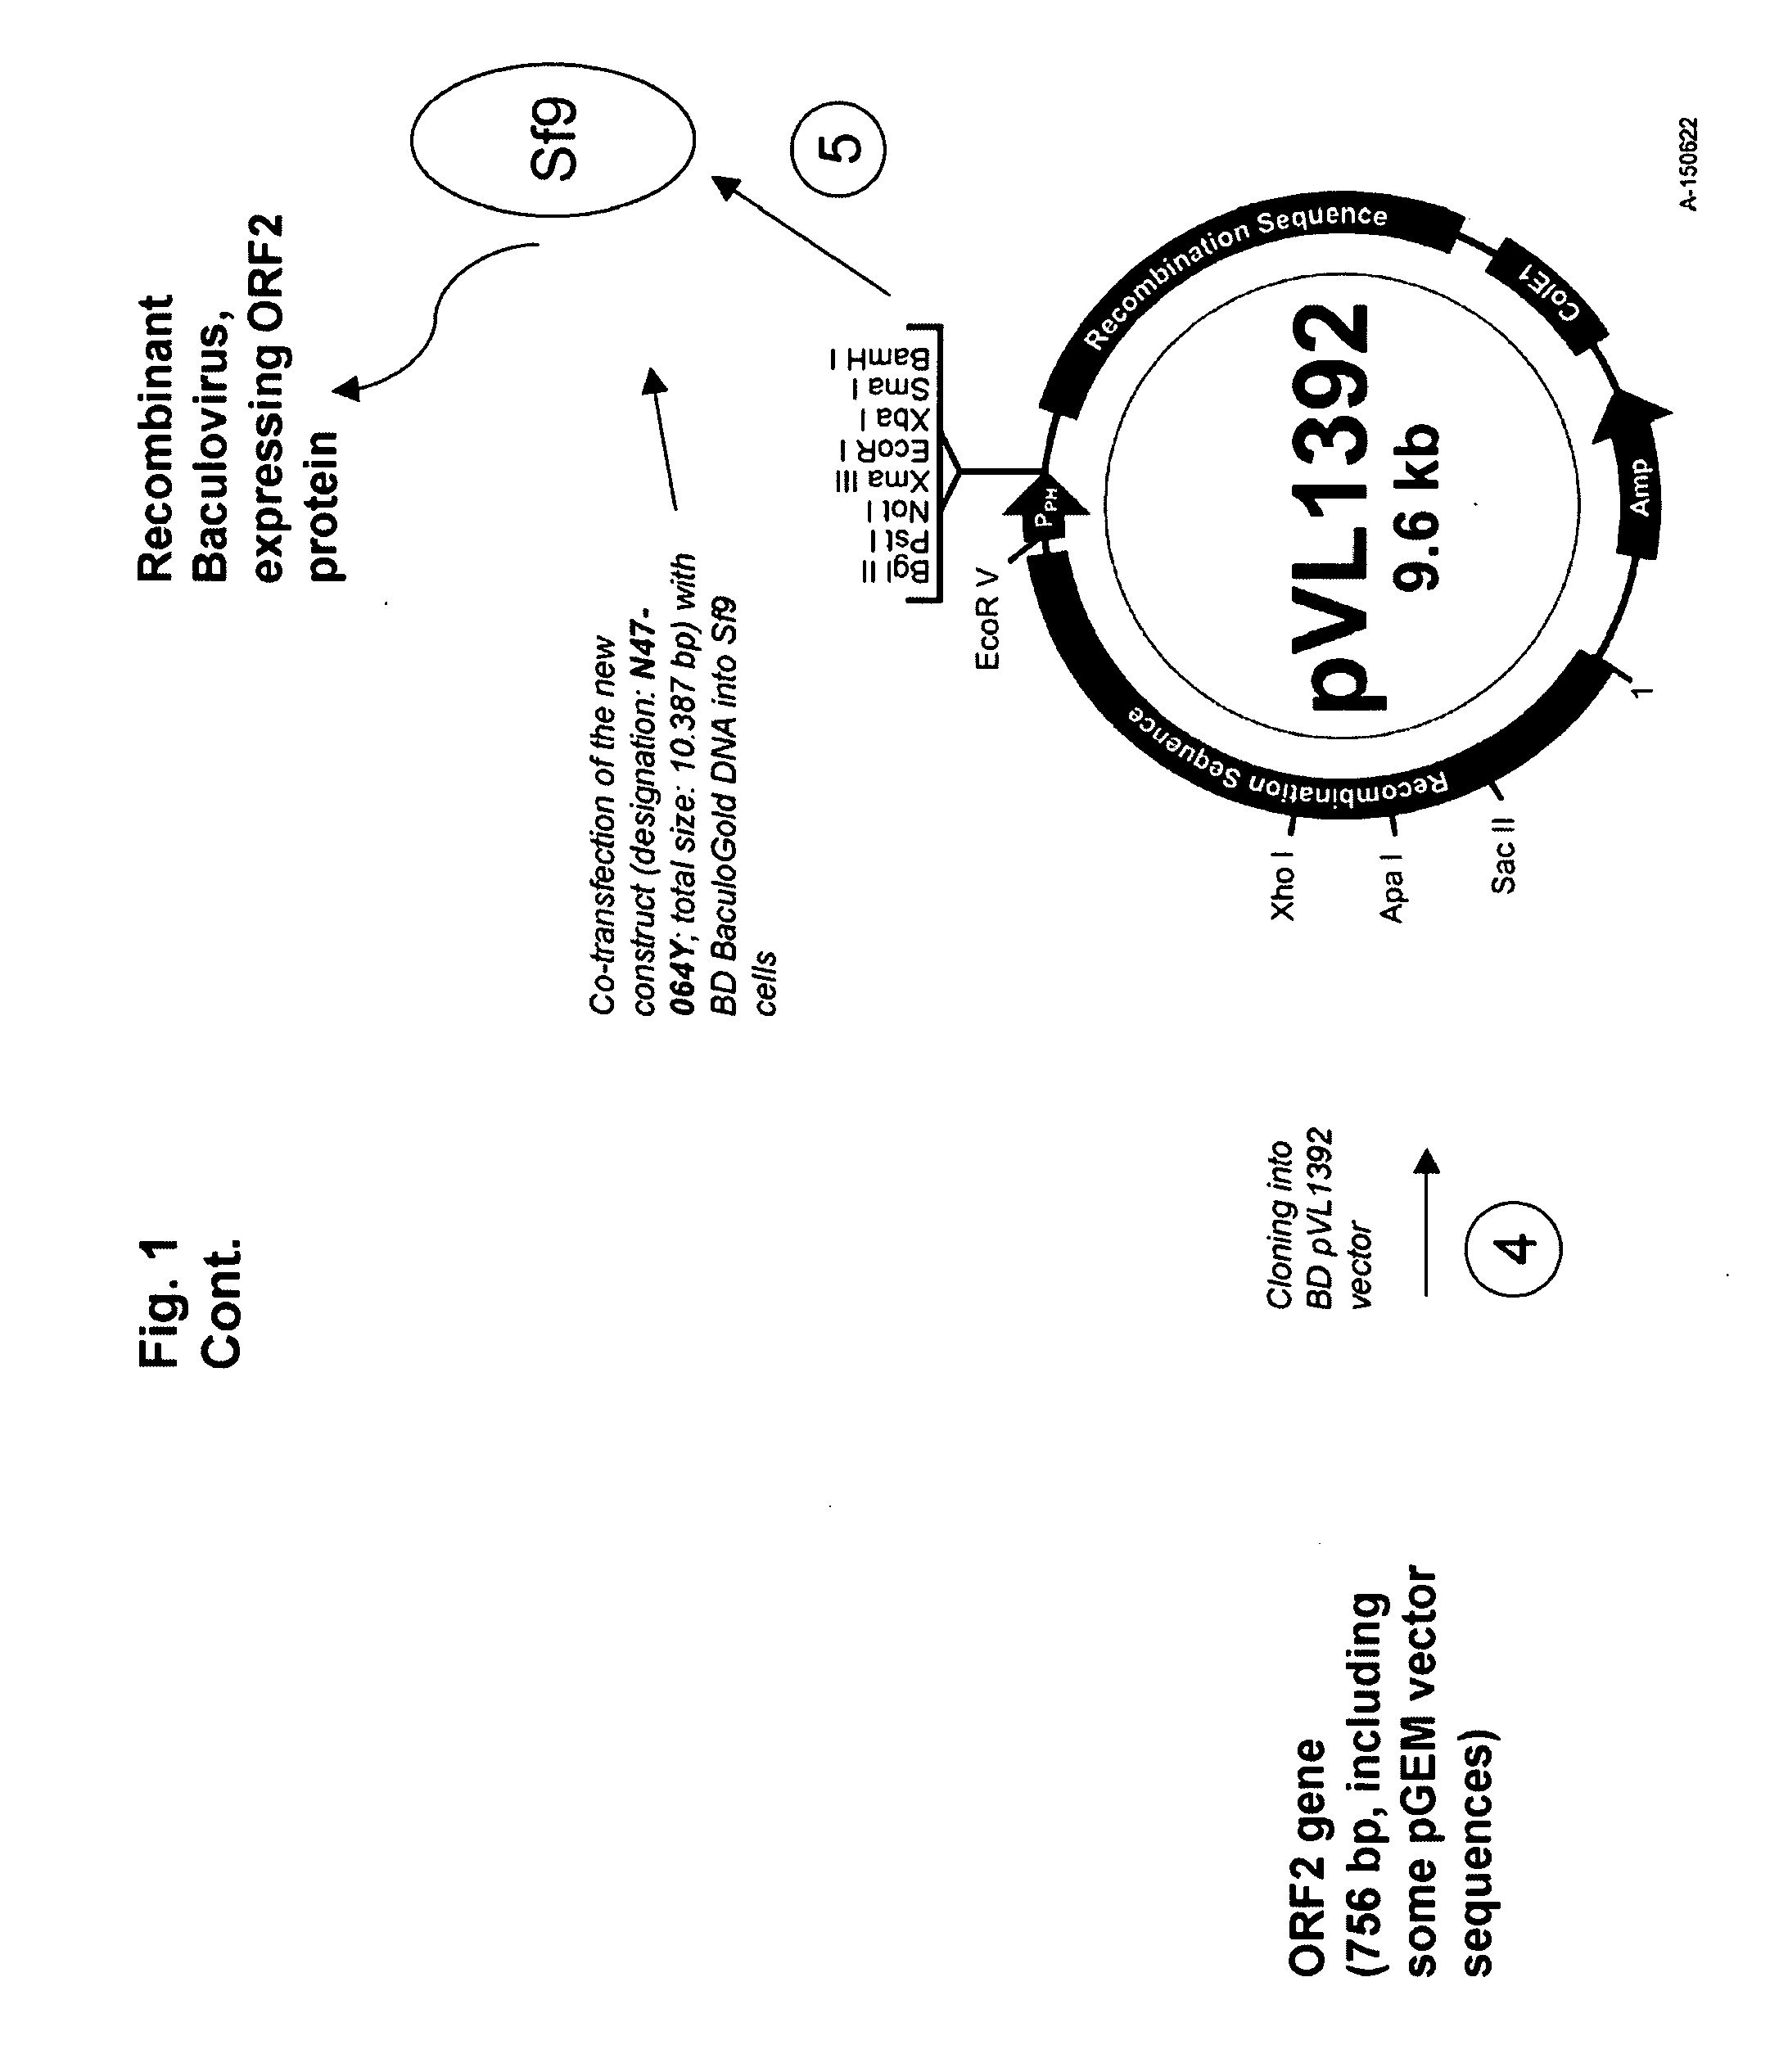 Multivalent pcv2 immunogenic compositions and methods of producing such compositions